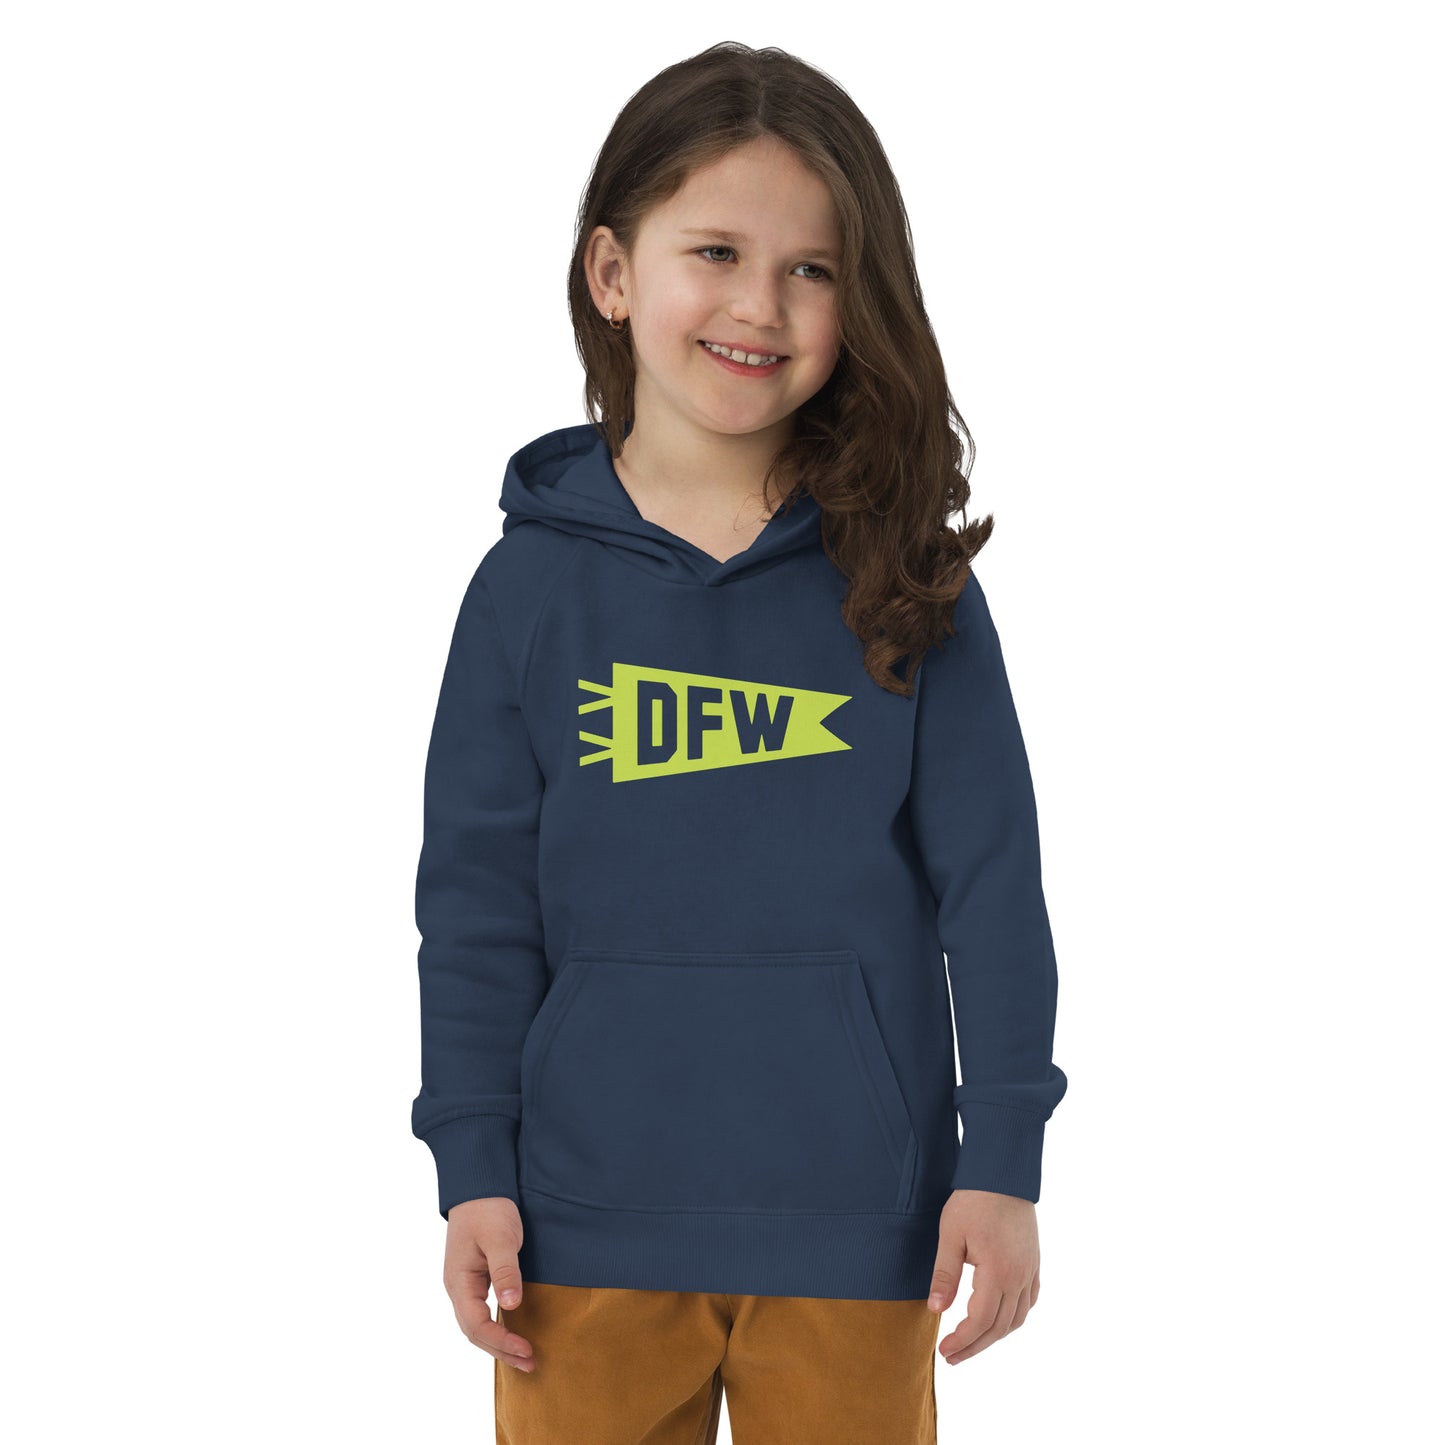 Kid's Sustainable Hoodie - Green Graphic • DFW Dallas • YHM Designs - Image 07